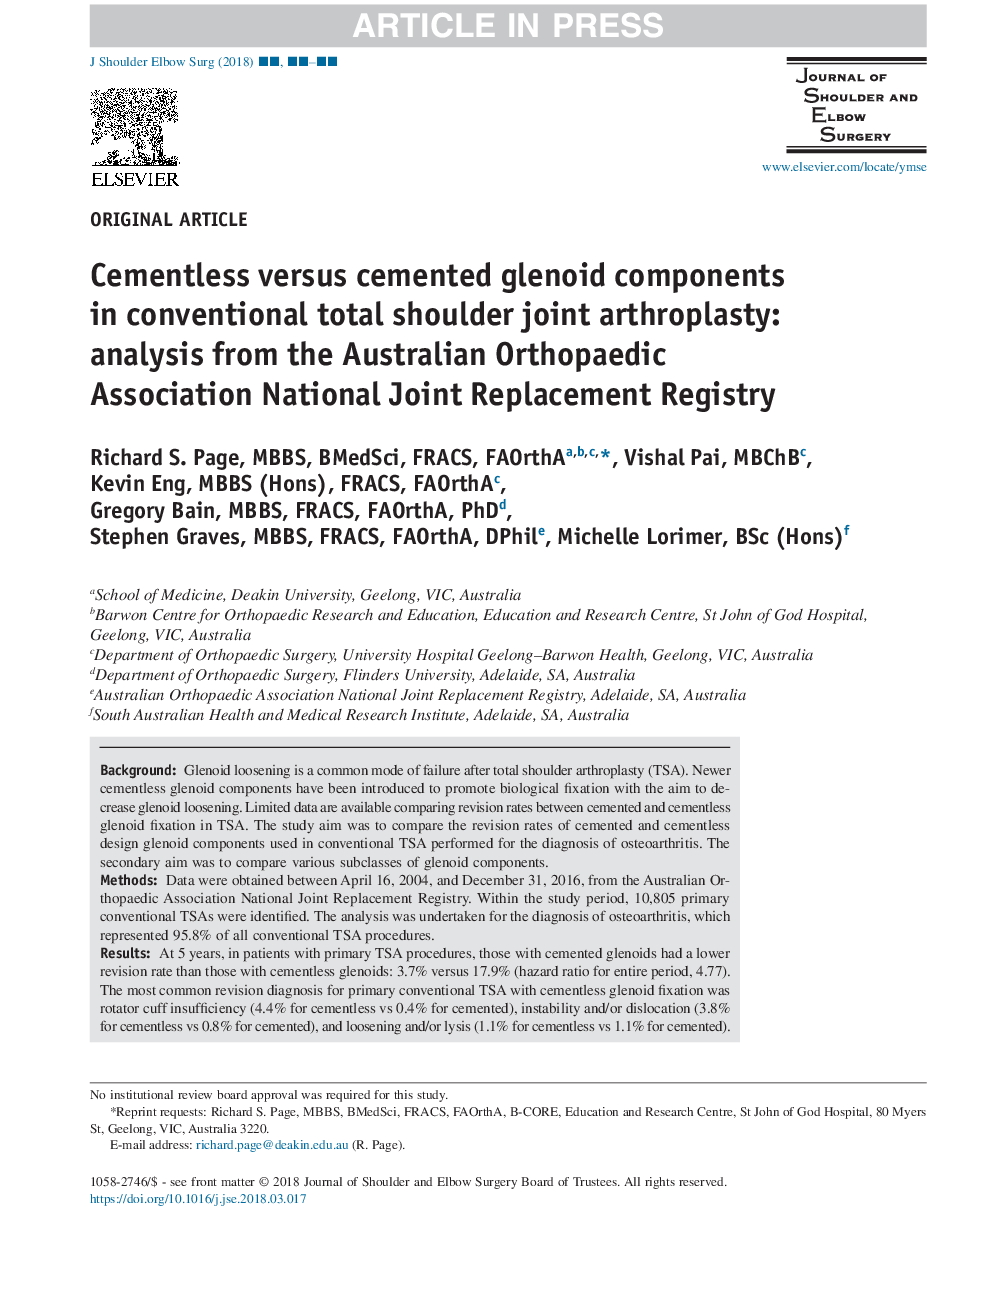 Cementless versus cemented glenoid components in conventional total shoulder joint arthroplasty: analysis from the Australian Orthopaedic Association National Joint Replacement Registry